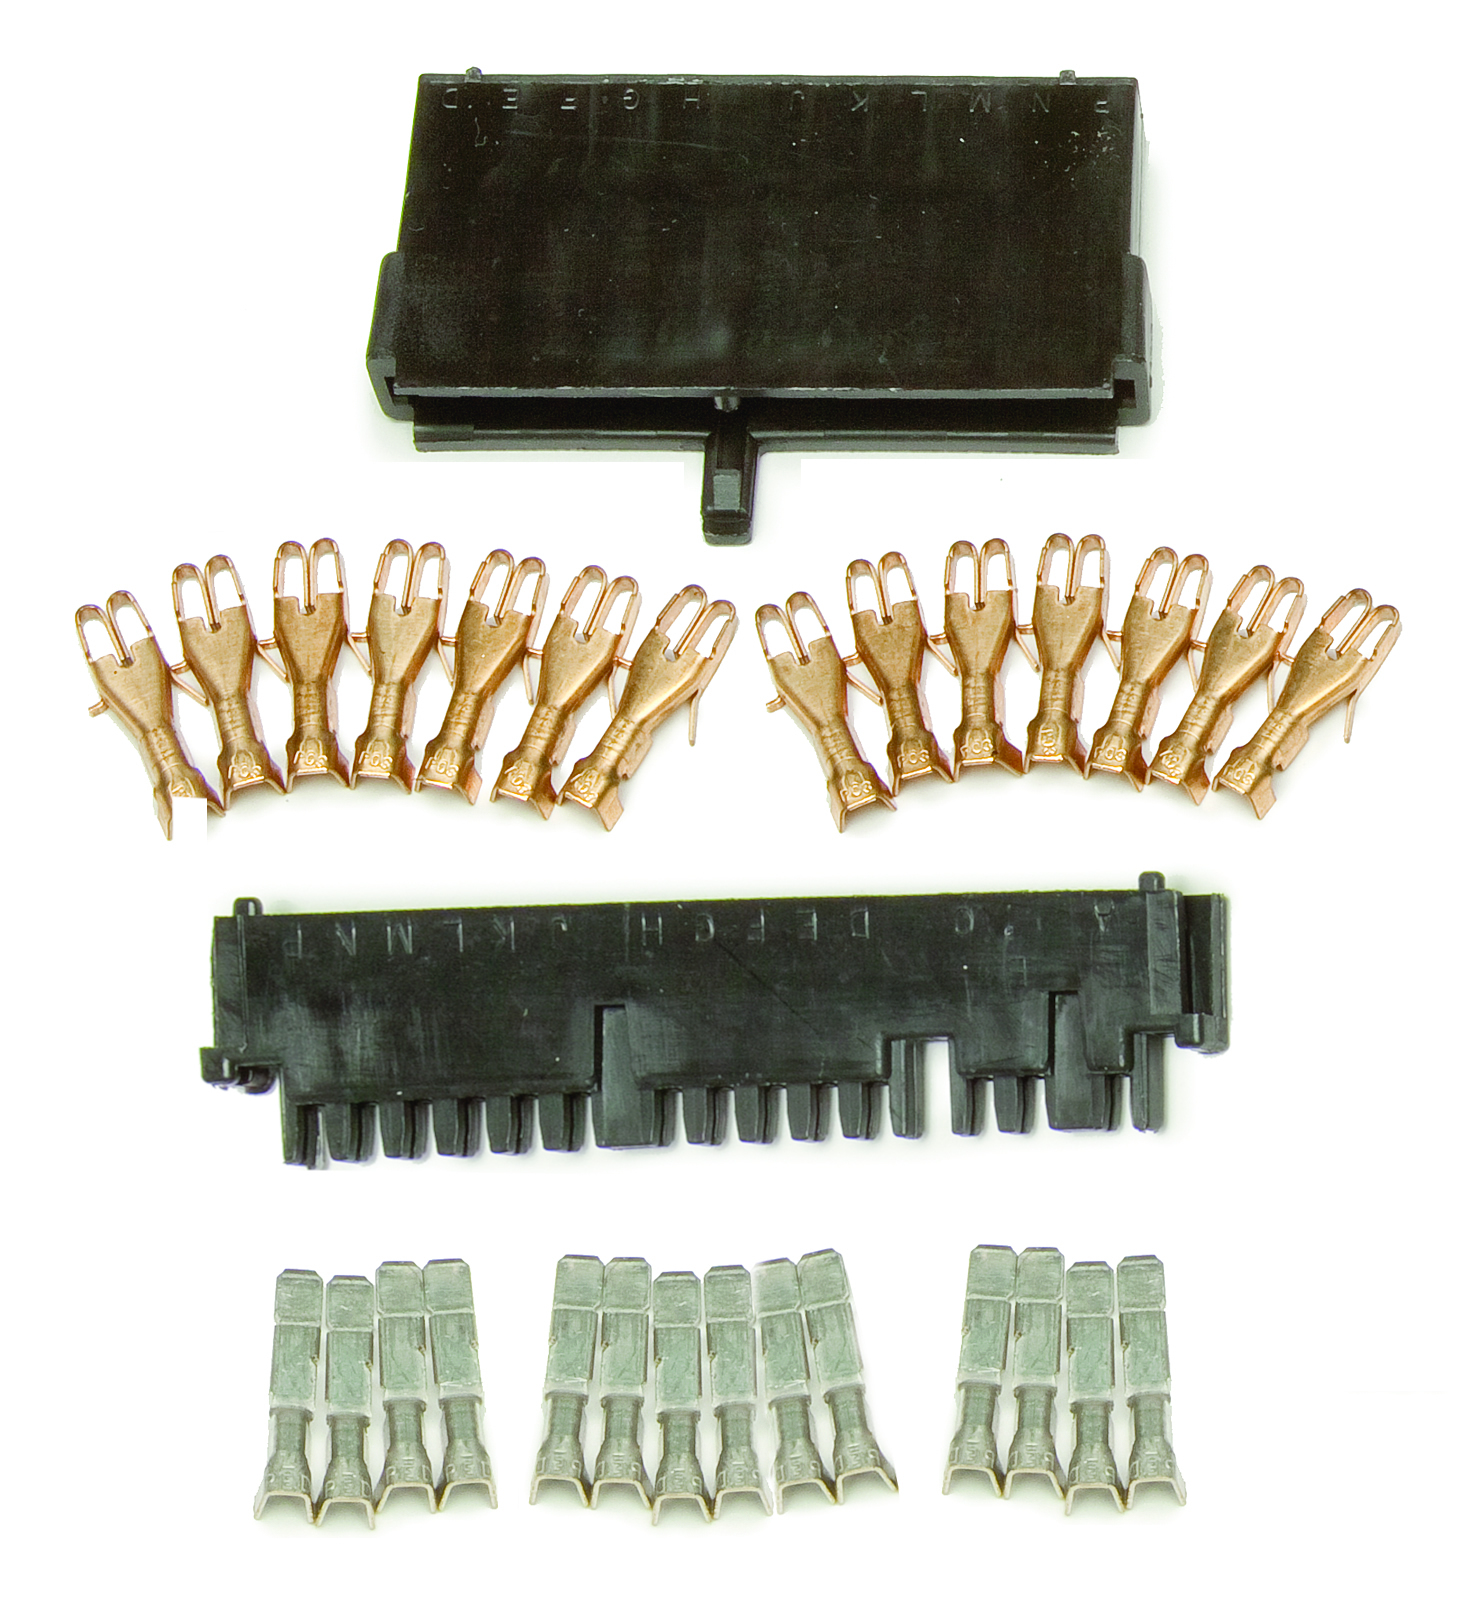 Painless Wiring 30840 Turn Signal Connectors, GM Steering Column, Connectors / Pins Included, Kit